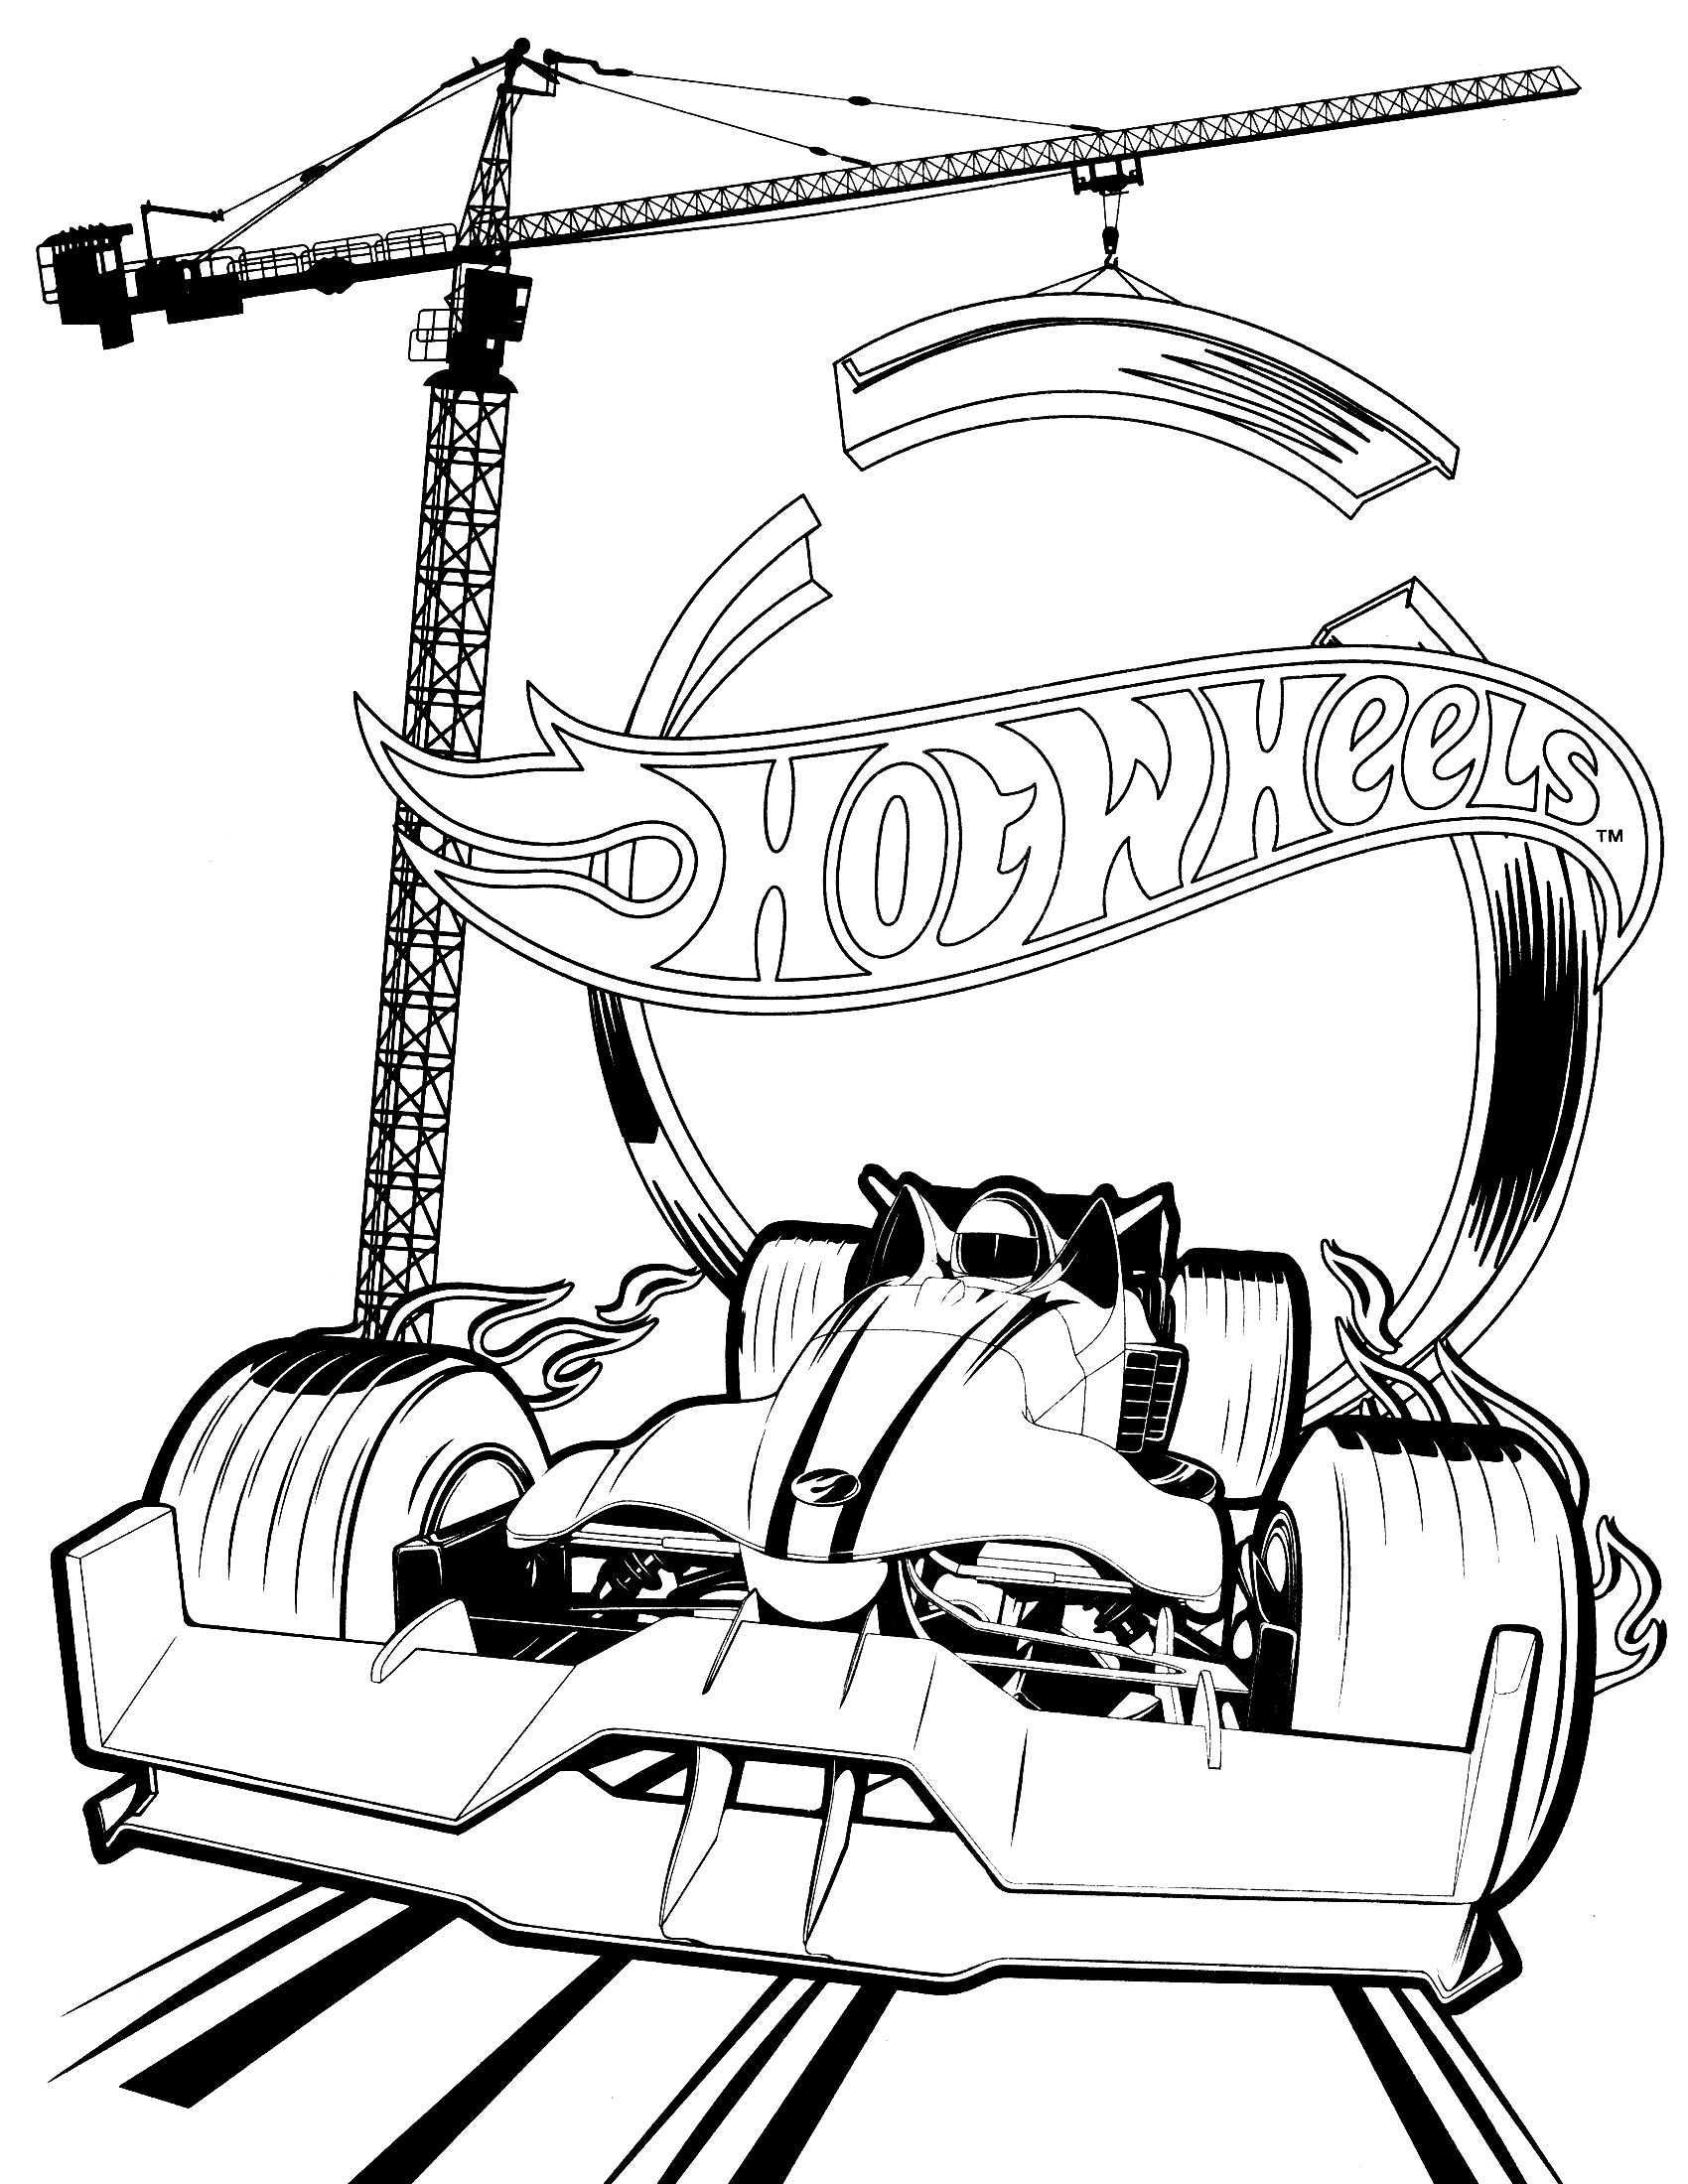 Team Hot Wheels Coloring Pages Coloring Page Cars Coloring Pages Race Car Coloring Pa